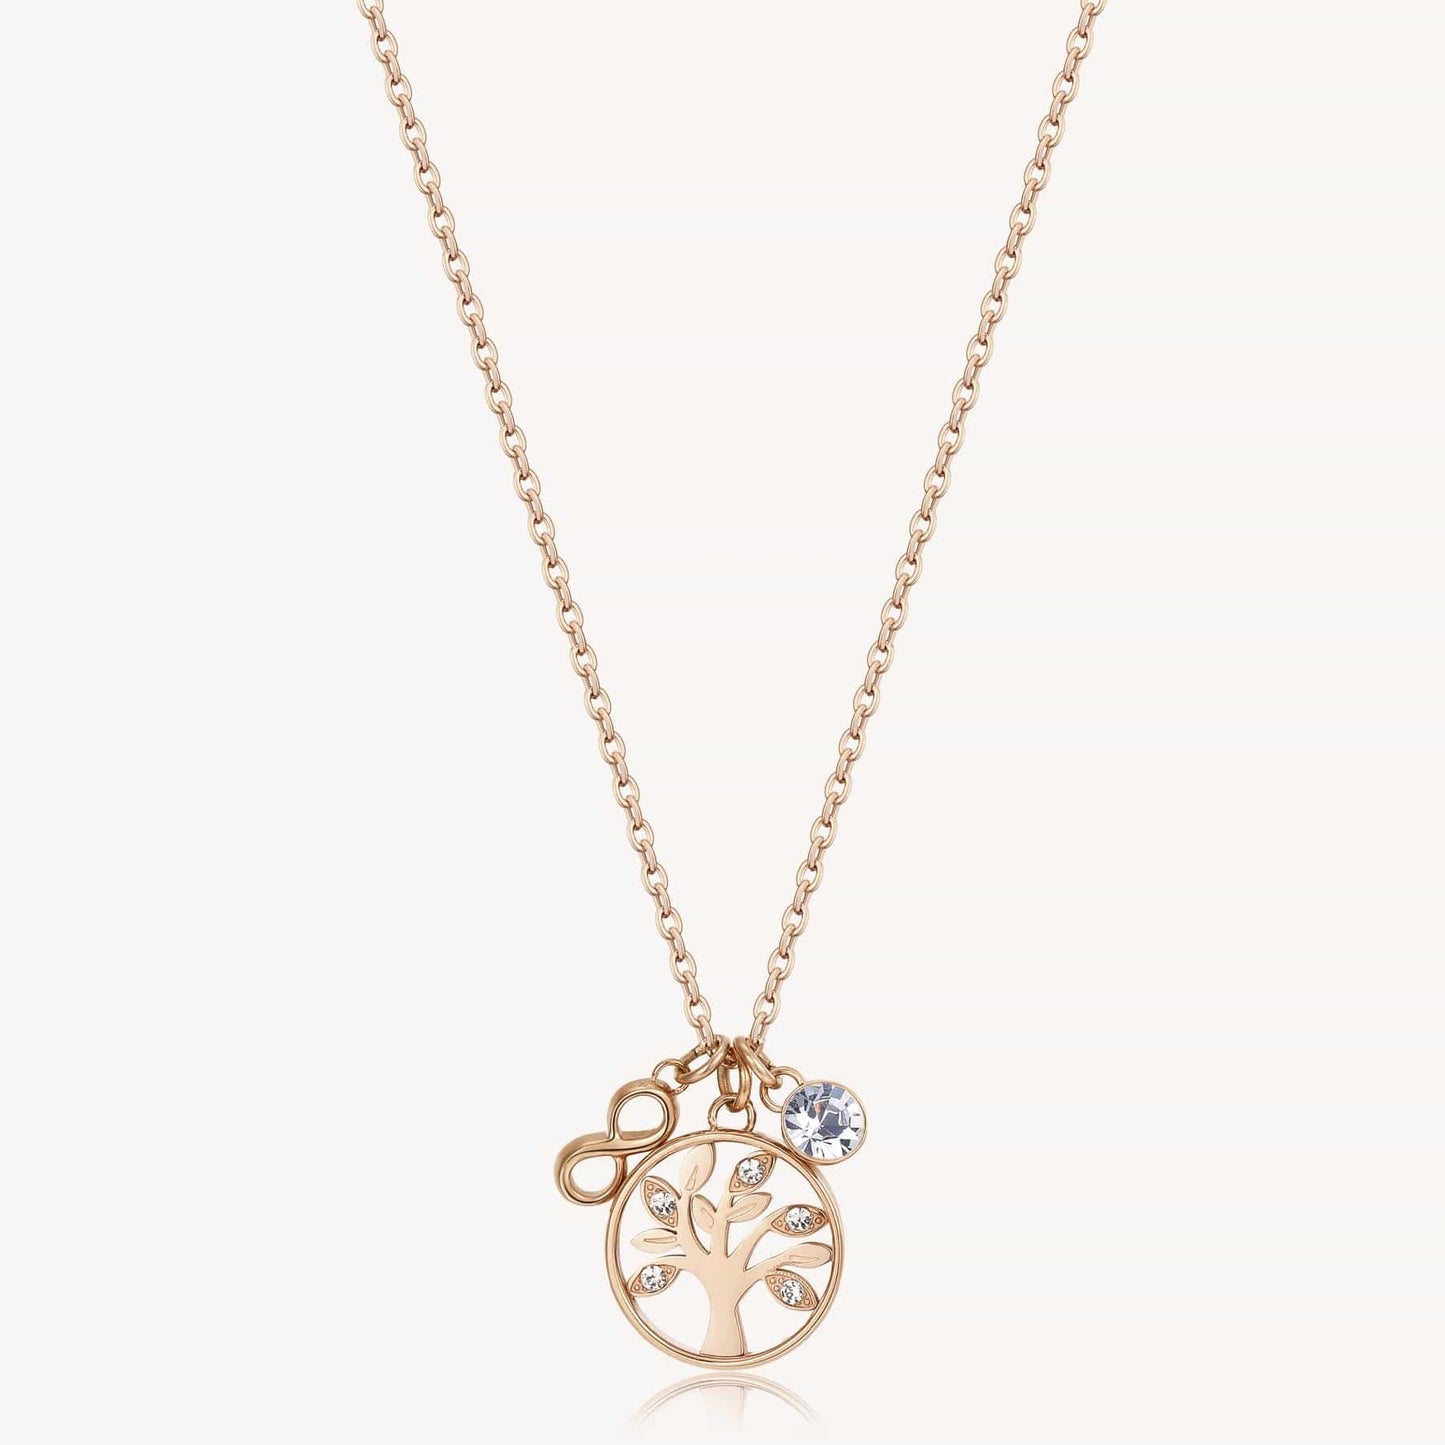 NKL-SS Stainless Steel Rose Gold Tone Chakra Necklace - Tree of Life